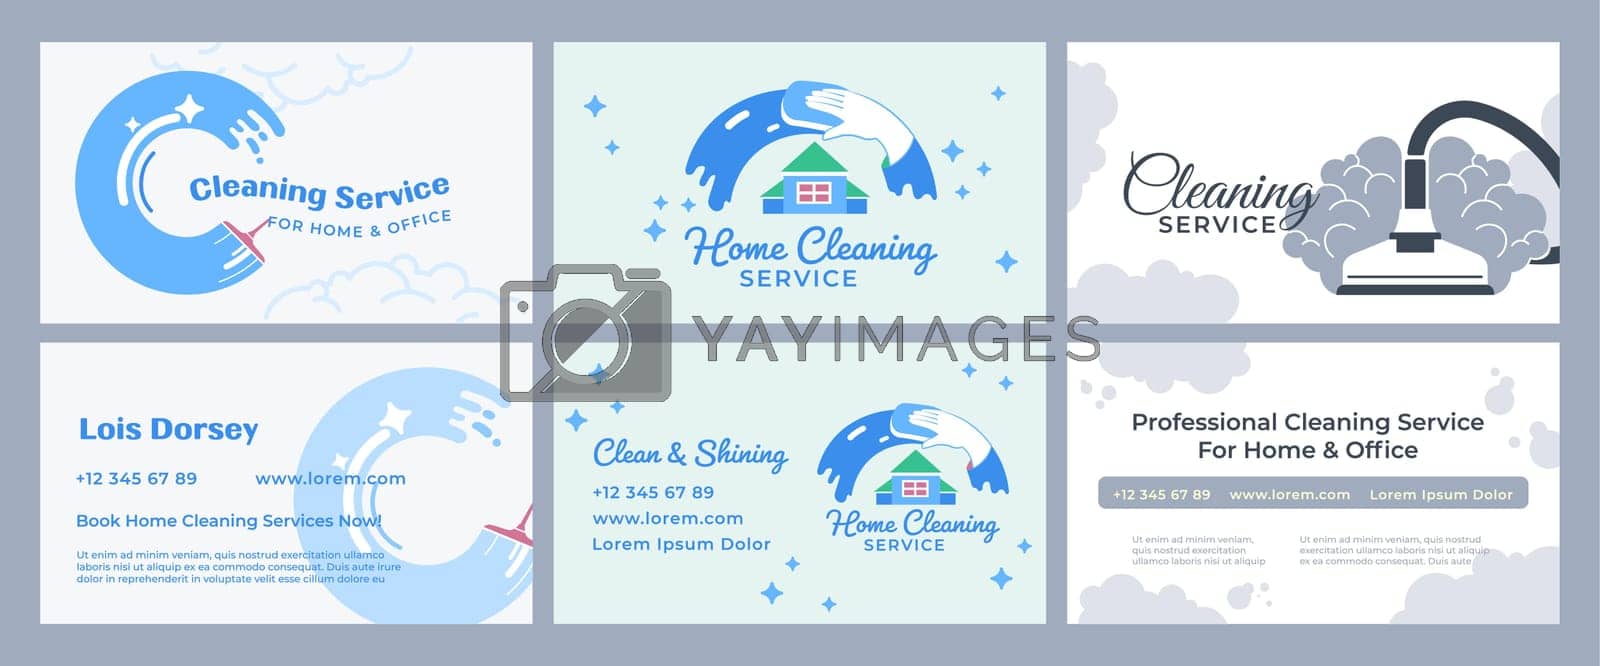 Royalty free image of Business card design set for cleaning service ad by Sonulkaster